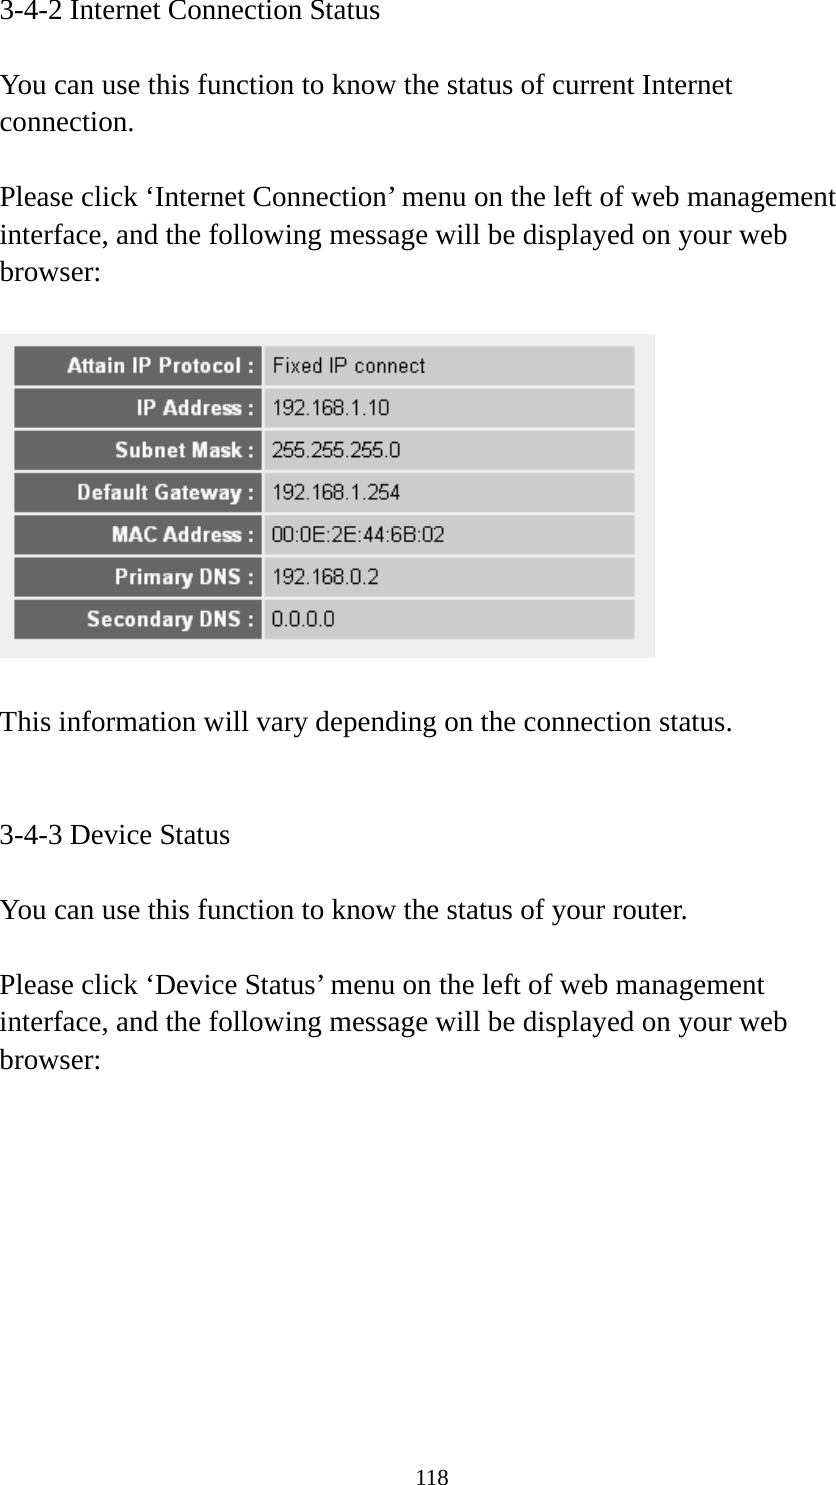 118 3-4-2 Internet Connection Status  You can use this function to know the status of current Internet connection.  Please click ‘Internet Connection’ menu on the left of web management interface, and the following message will be displayed on your web browser:    This information will vary depending on the connection status.   3-4-3 Device Status  You can use this function to know the status of your router.  Please click ‘Device Status’ menu on the left of web management interface, and the following message will be displayed on your web browser:  